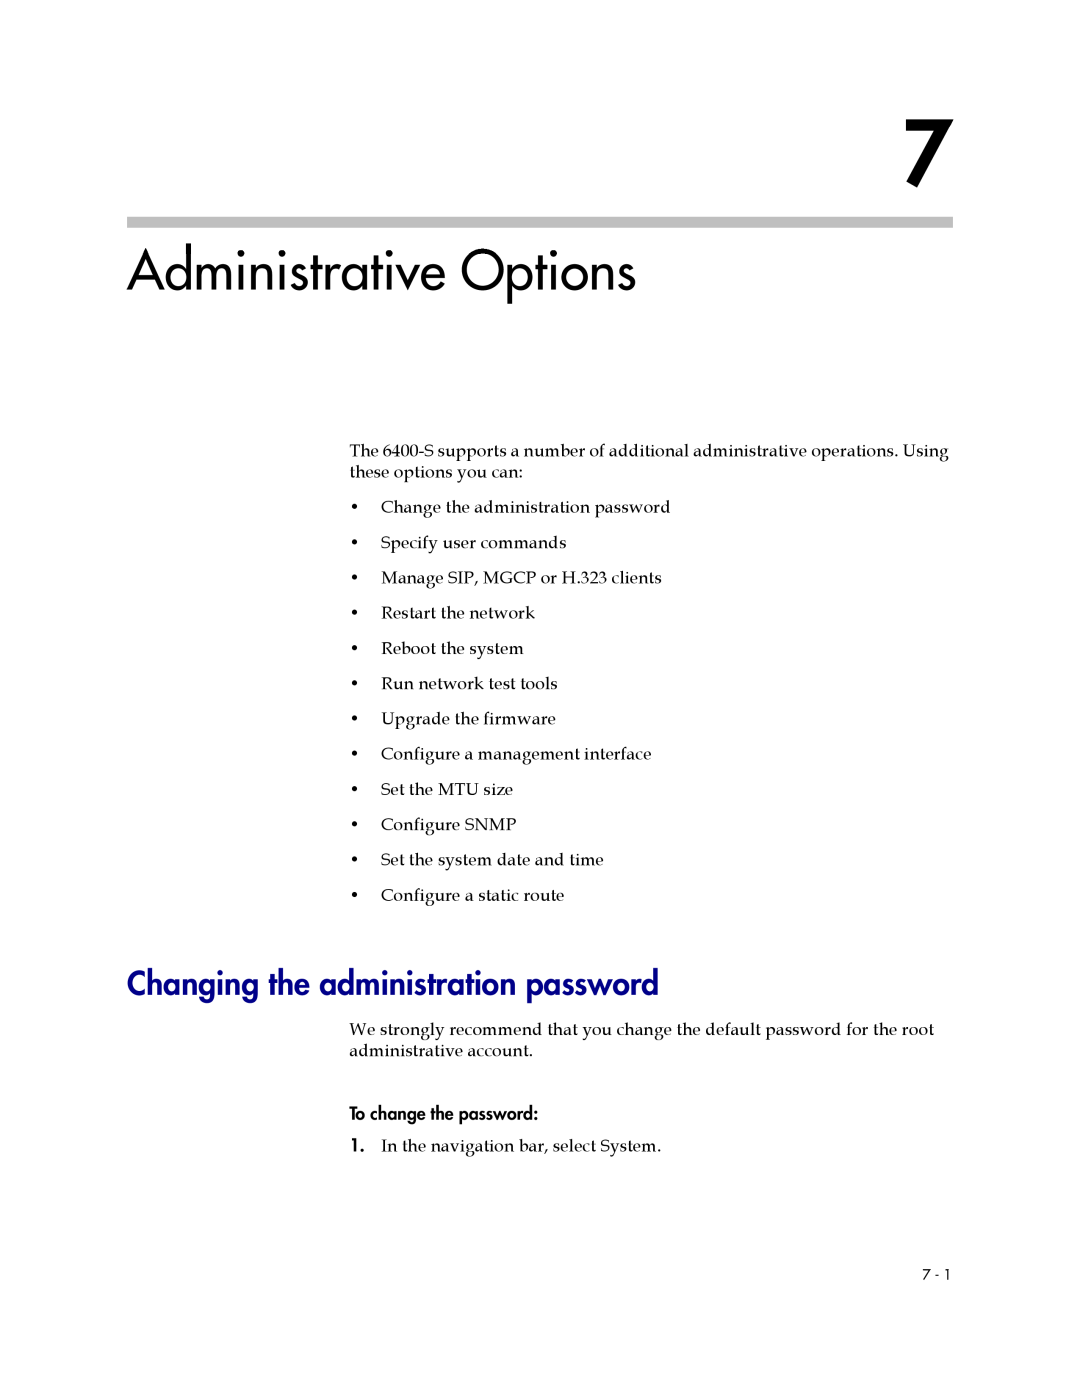 Polycom 6400-S manual Administrative Options, Changing the administration password 